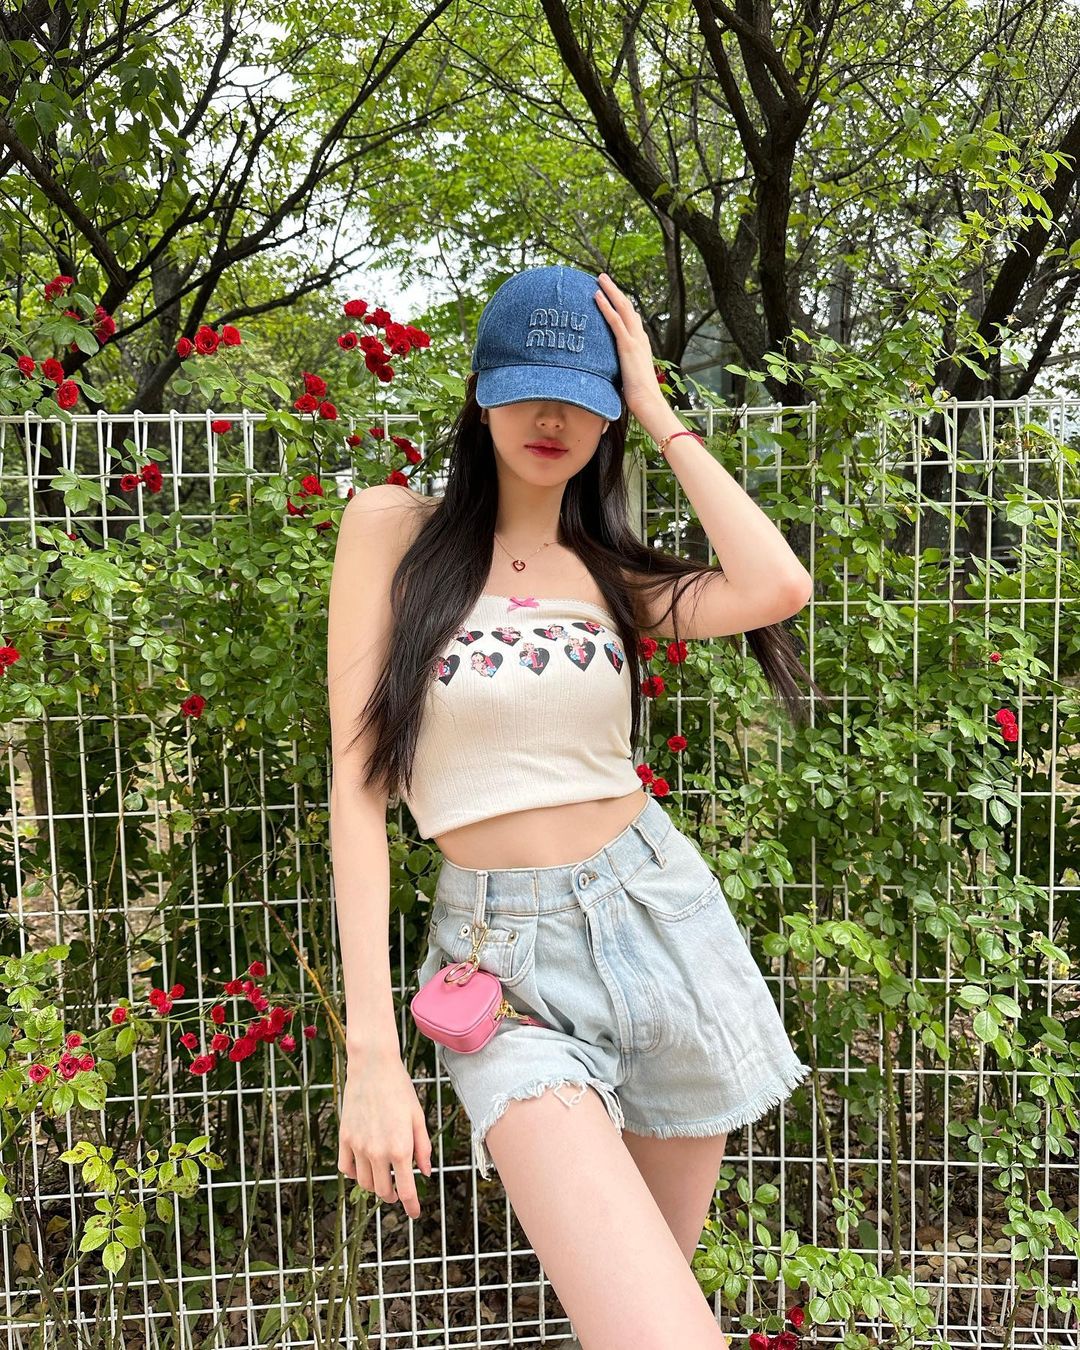 Wonyoung, God-given body + summer look.. 'Queen car'